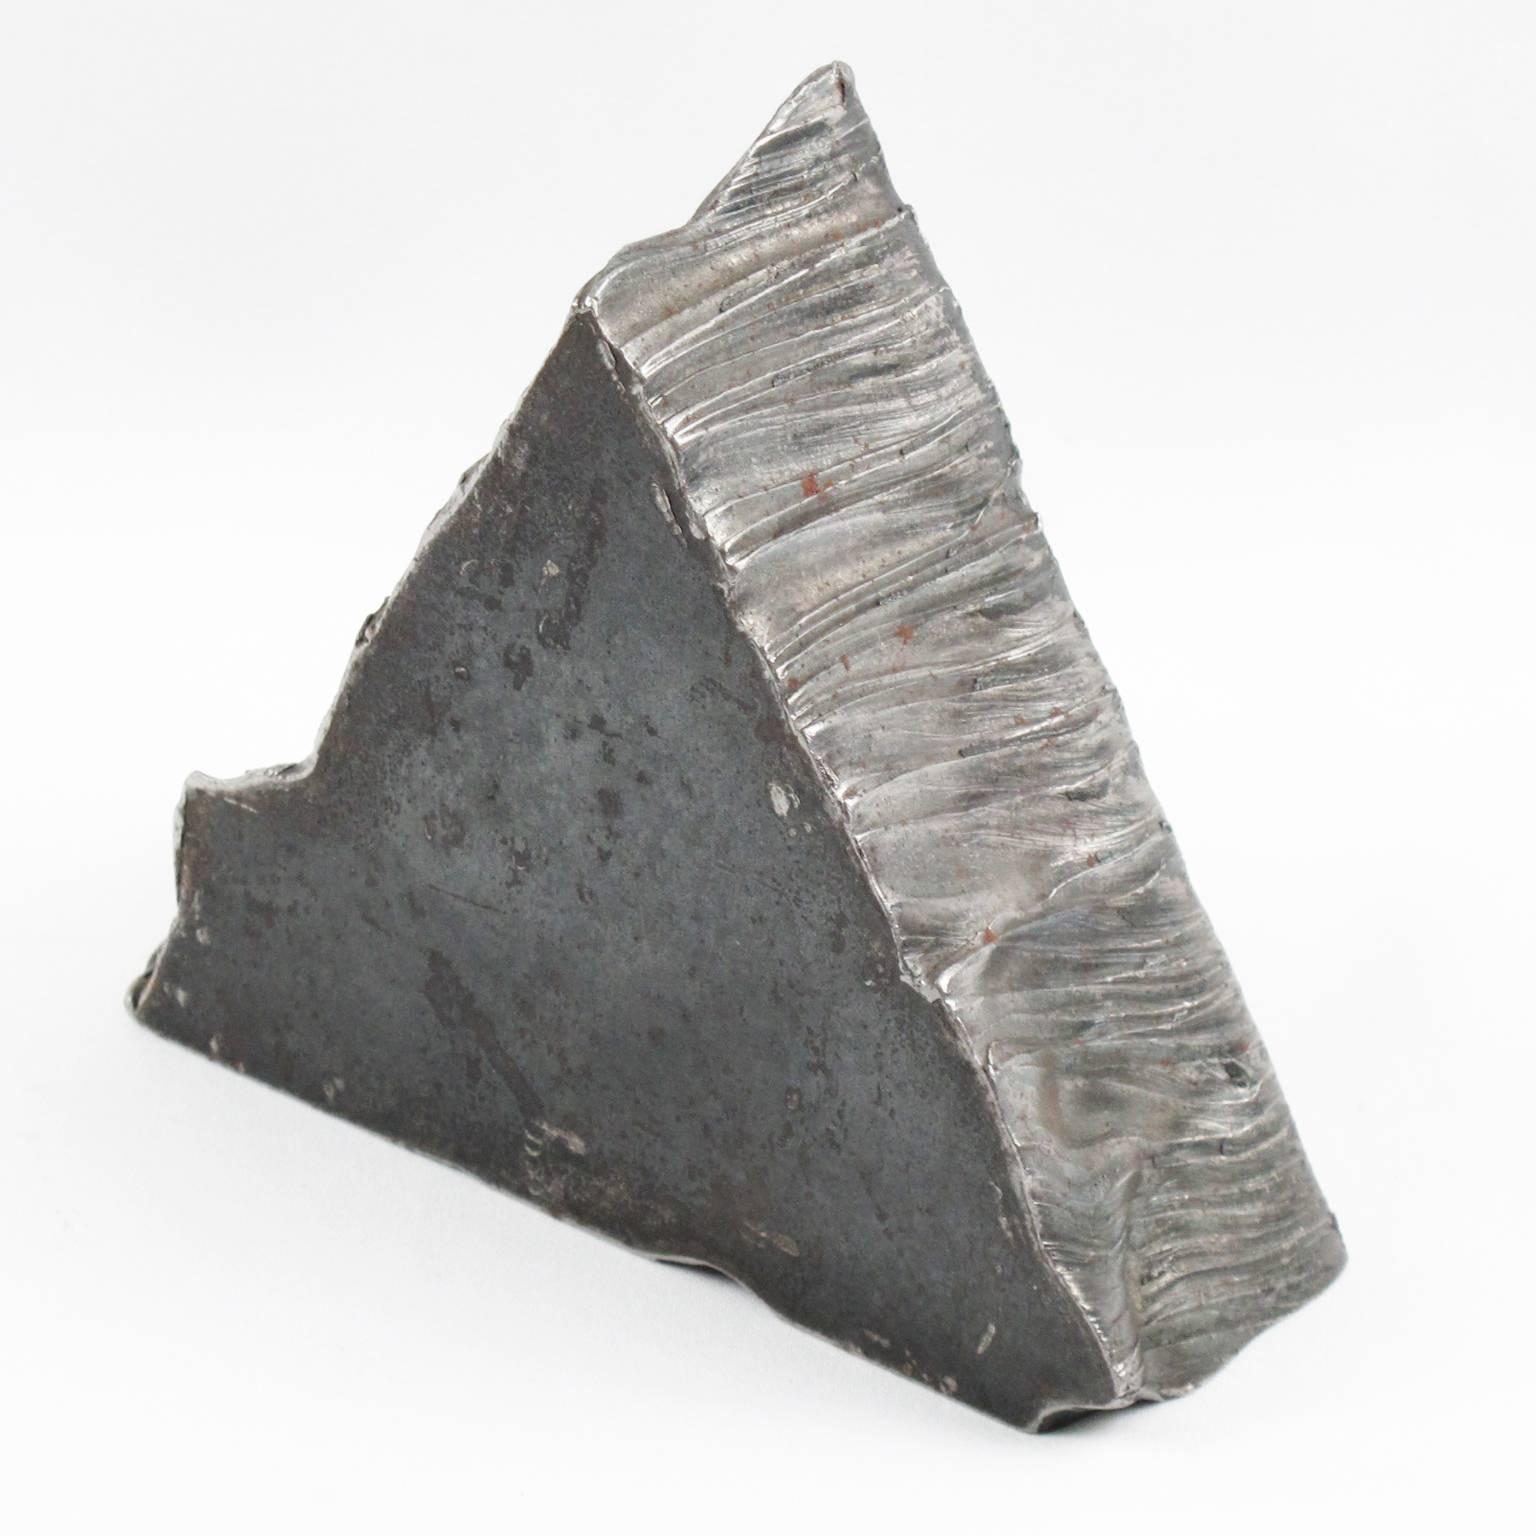 Vintage Industrial geometric raw stainless steel object that would make an excellent paperweight on a desk. Interesting triangle shape (can be used in upright position or flat) with sculptural carved edges. Very good vintage